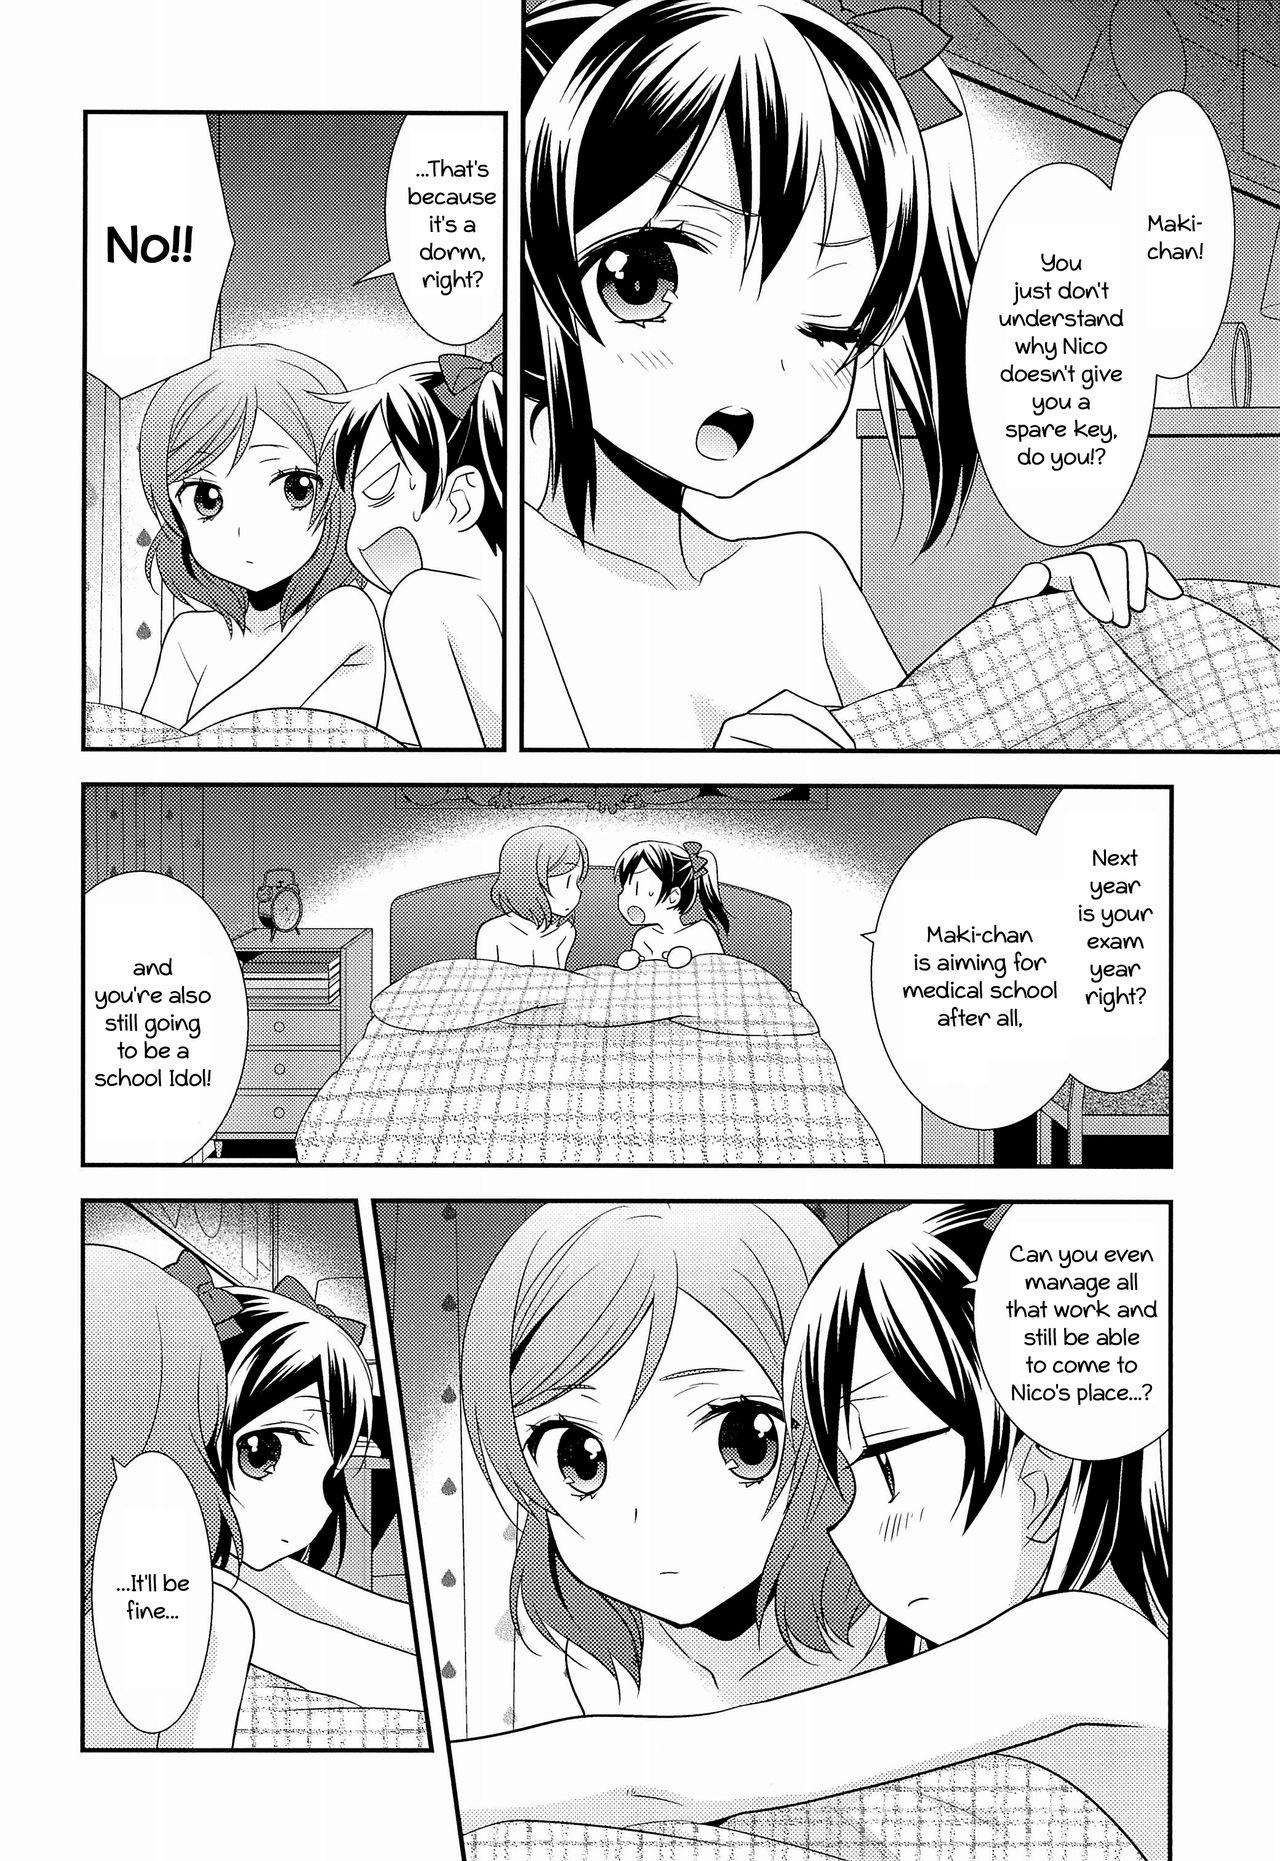 Foreplay BABY I LOVE YOU - Love live Glamour - Page 8